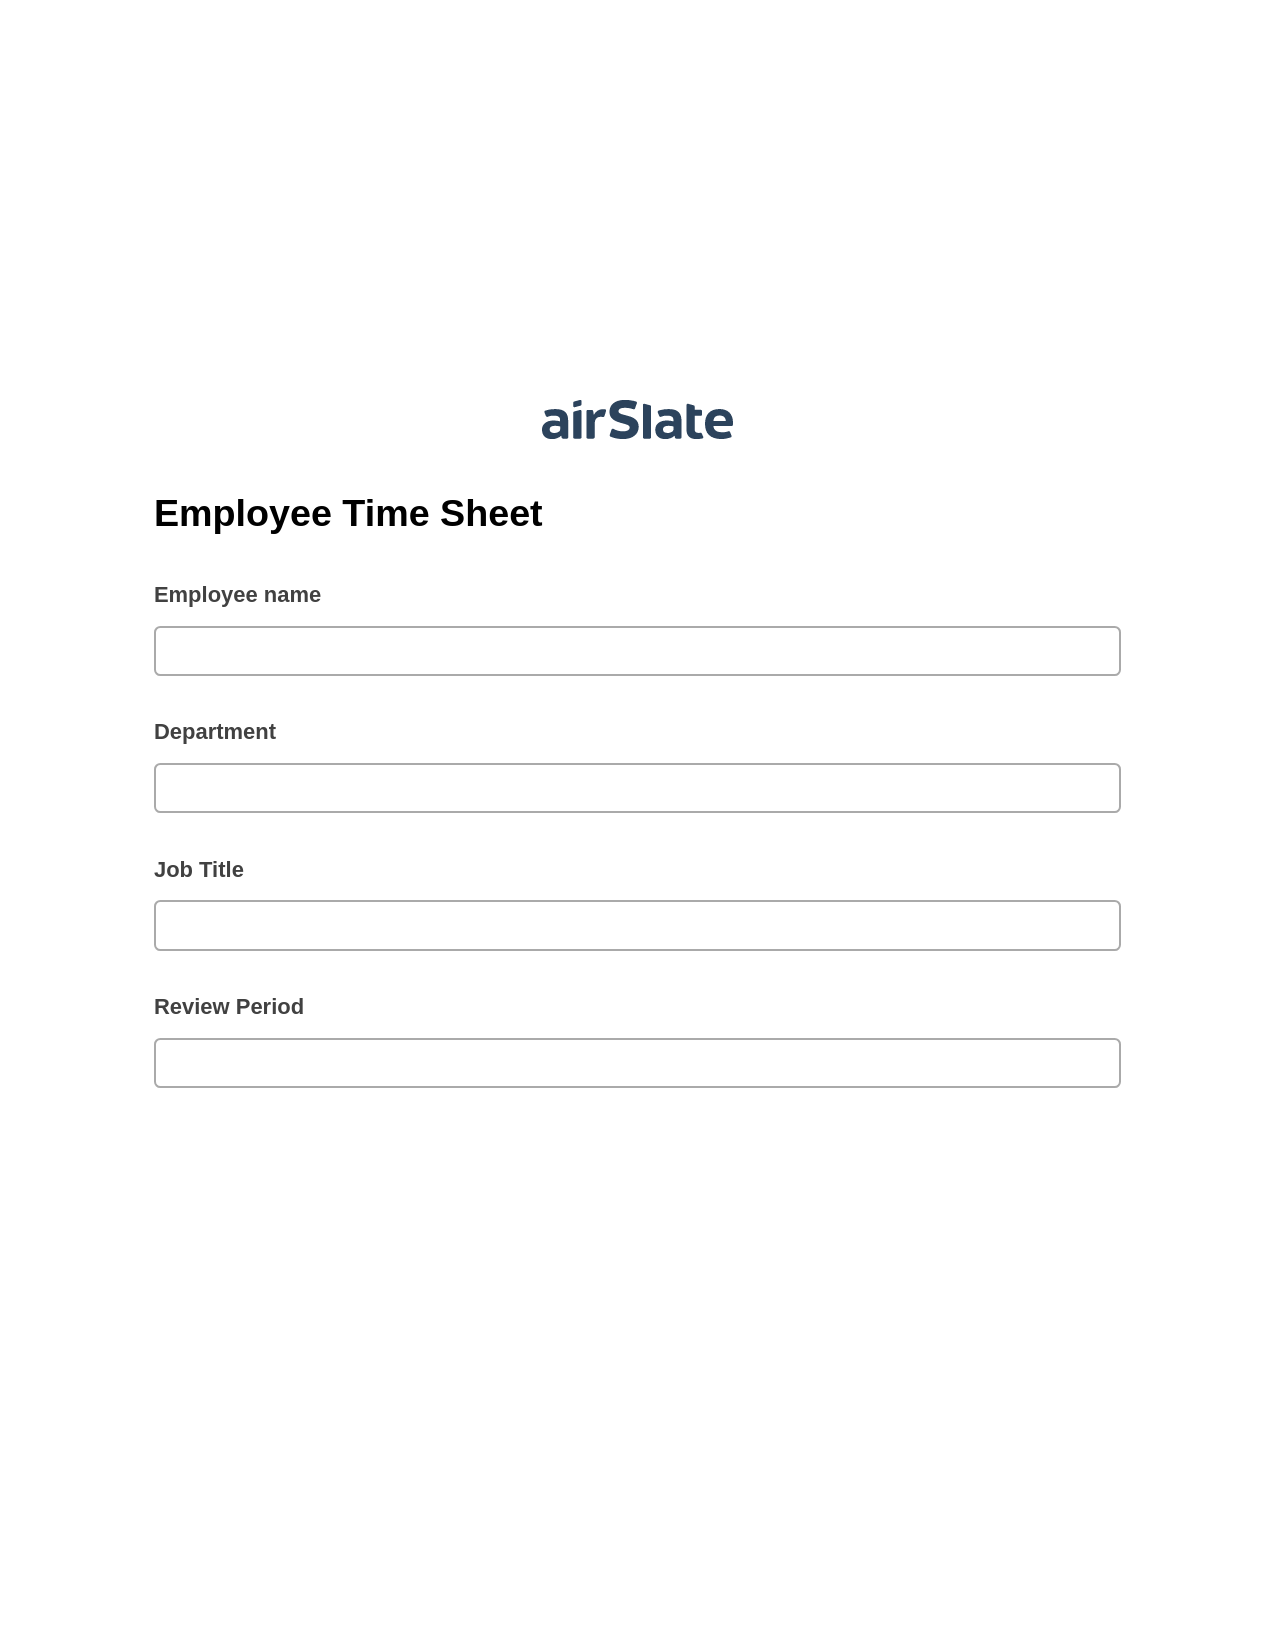 Employee Time Sheet Pre-fill from Salesforce Records with SOQL Bot, Google Calendar Bot, Export to Smartsheet